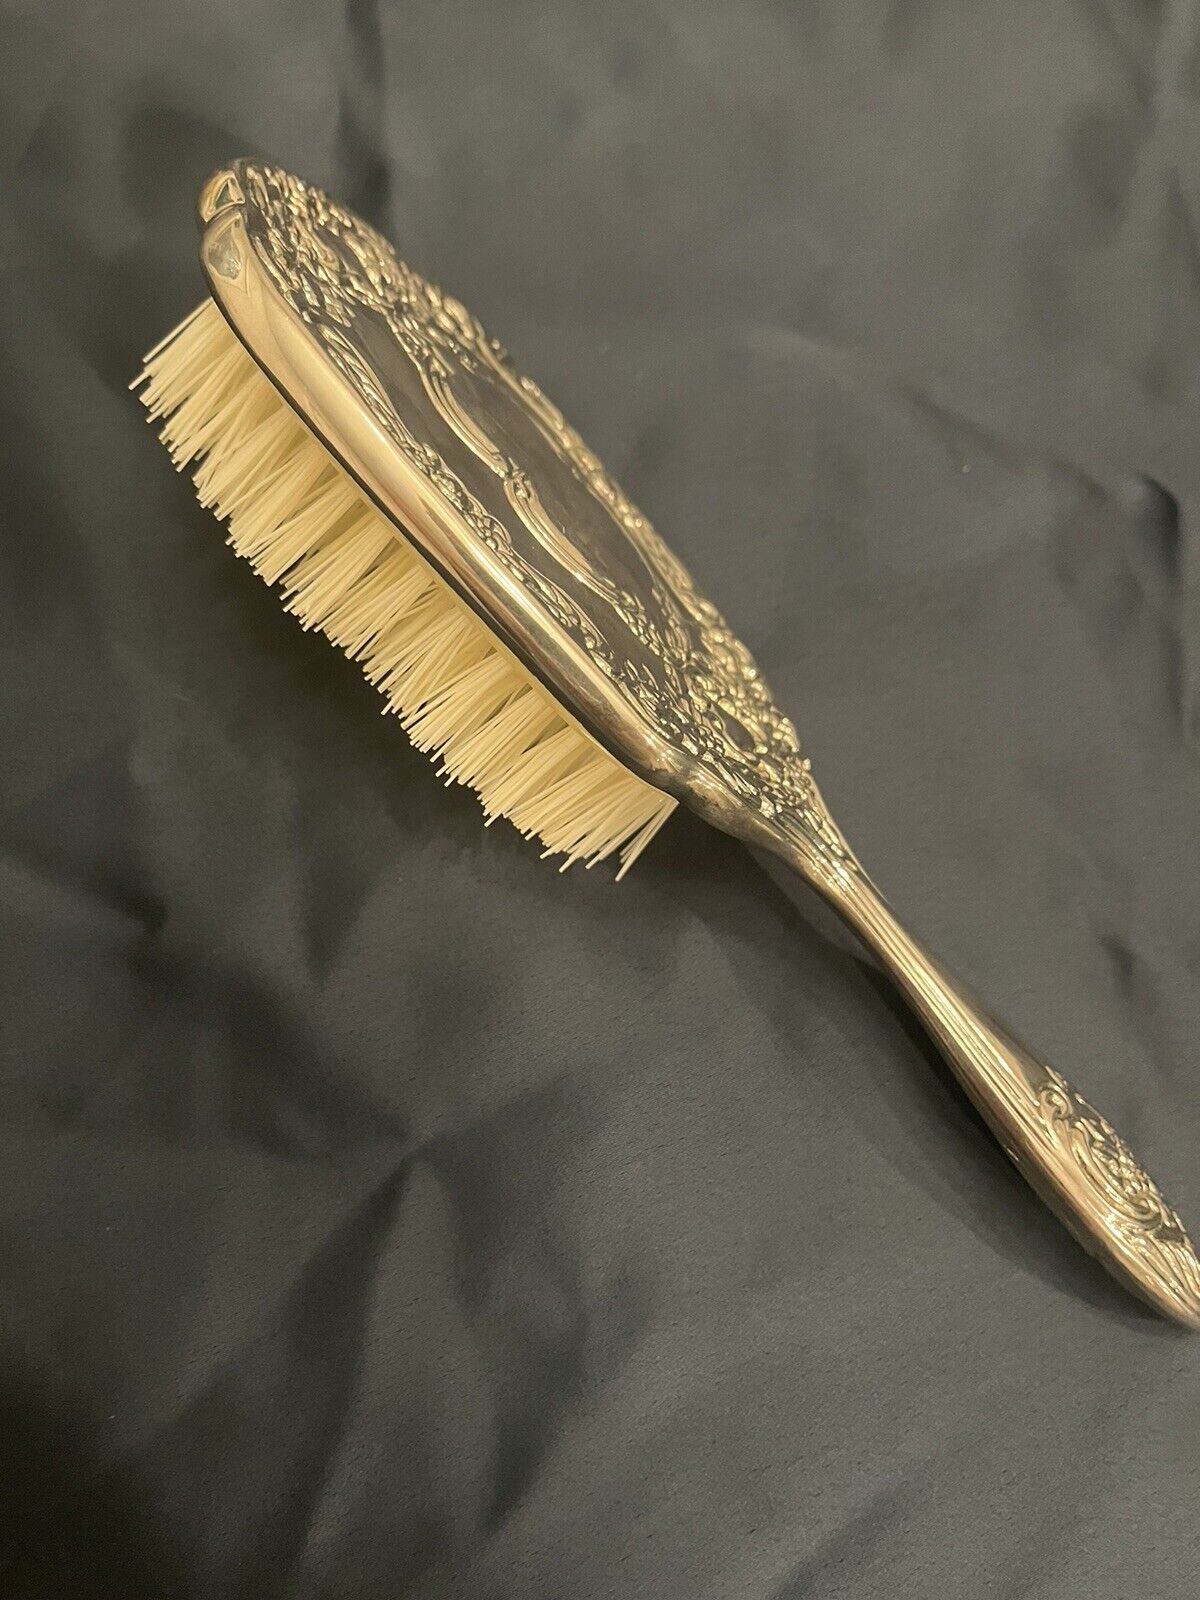 VTG 70’s Silver Plated Heavy Metal Antique Style Vanity Hair Brush